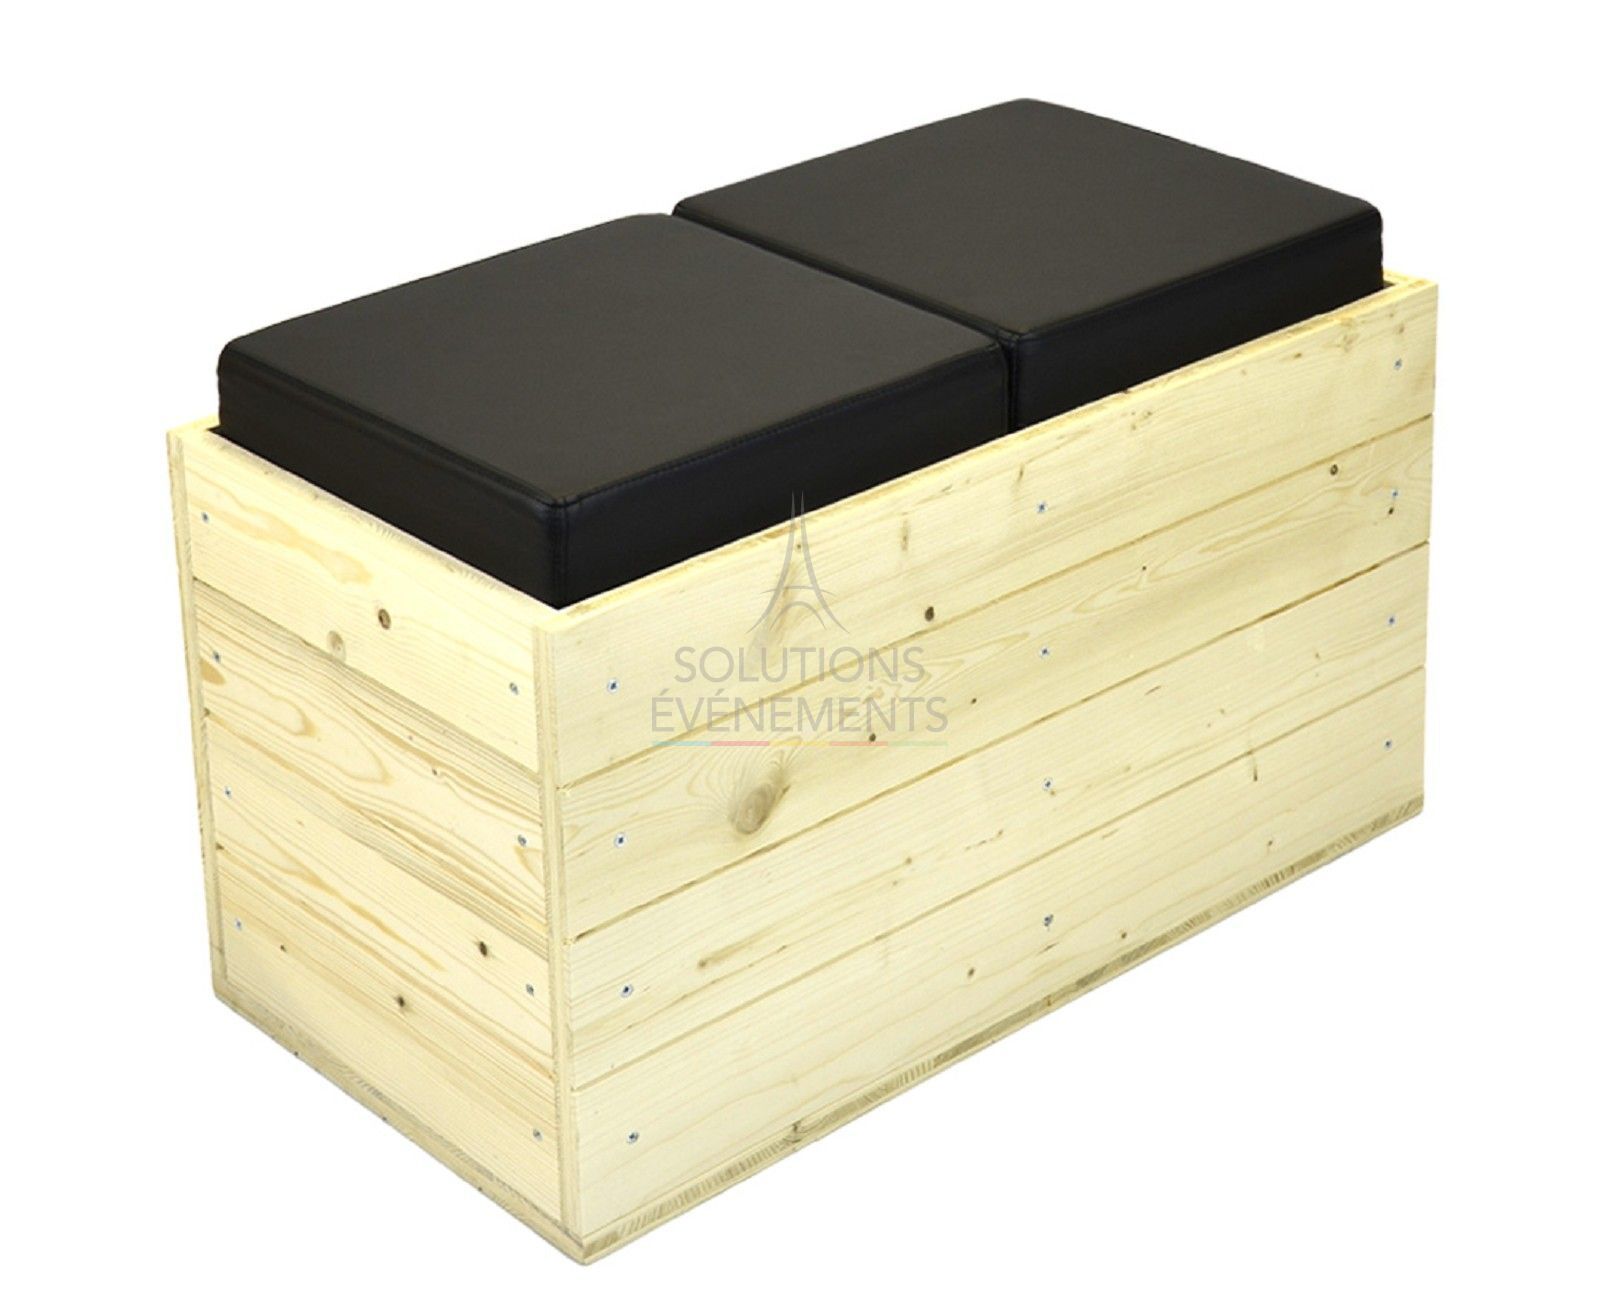 Rental eco-responsible wooden bench black leather